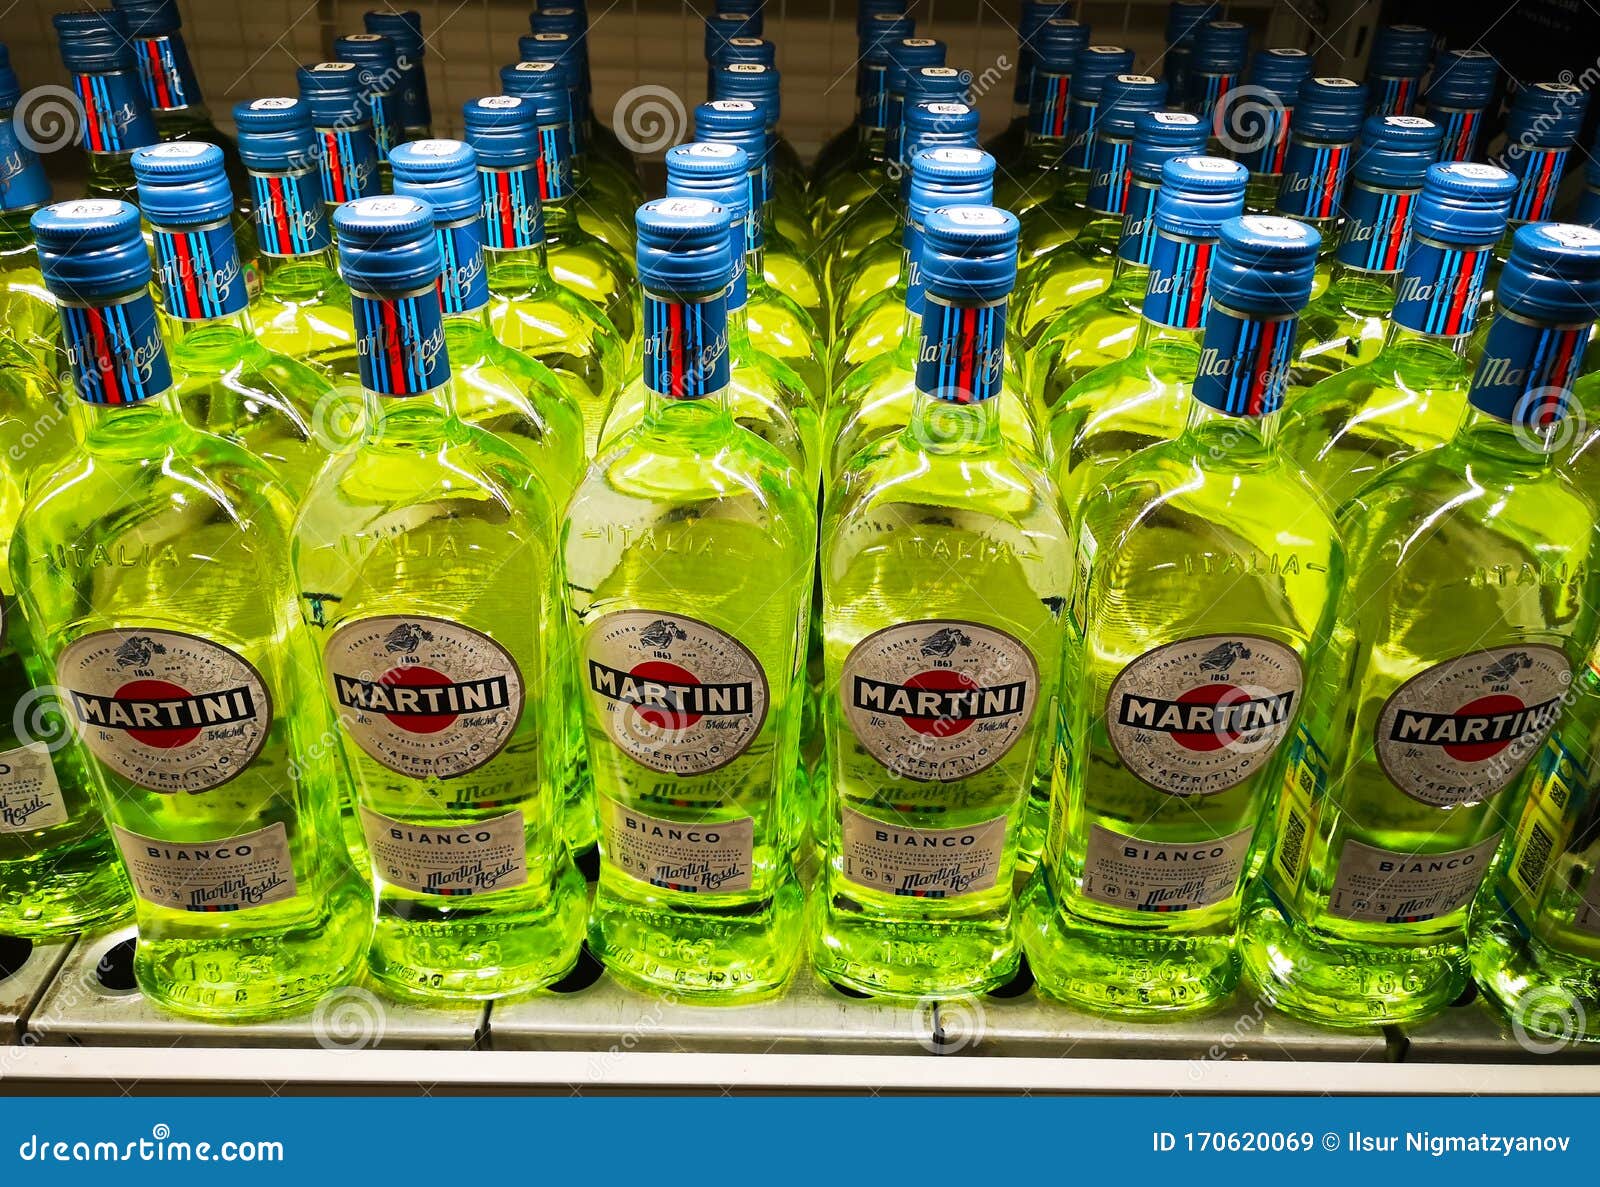 Vermouth Martini Bianco in Glass Bottle Put Up for Sale in Metro Hypermarket on January 20, 2020 in Russia, Kazan, Editorial Stock Image - Image asti, drink: 170620069